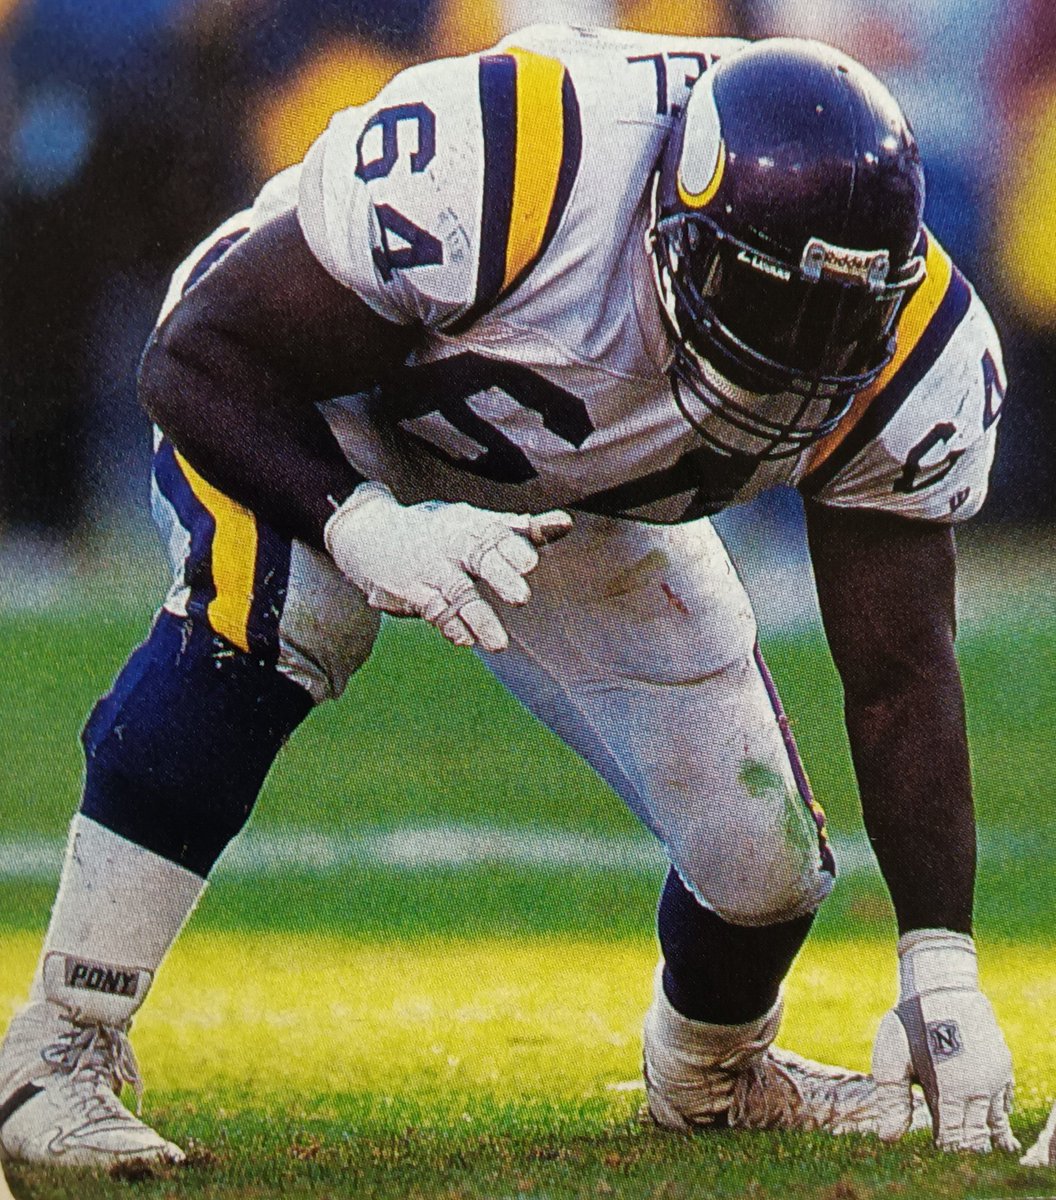 One of the best guards ever:Randall McDaniel:
Started 202 consecutive games across 14 seasons.
7x First-Team All-Pro.
12x Pro Bowler.
NFL 1990's All-Decade team.#NFL #NFL100 #HOF #Vikings